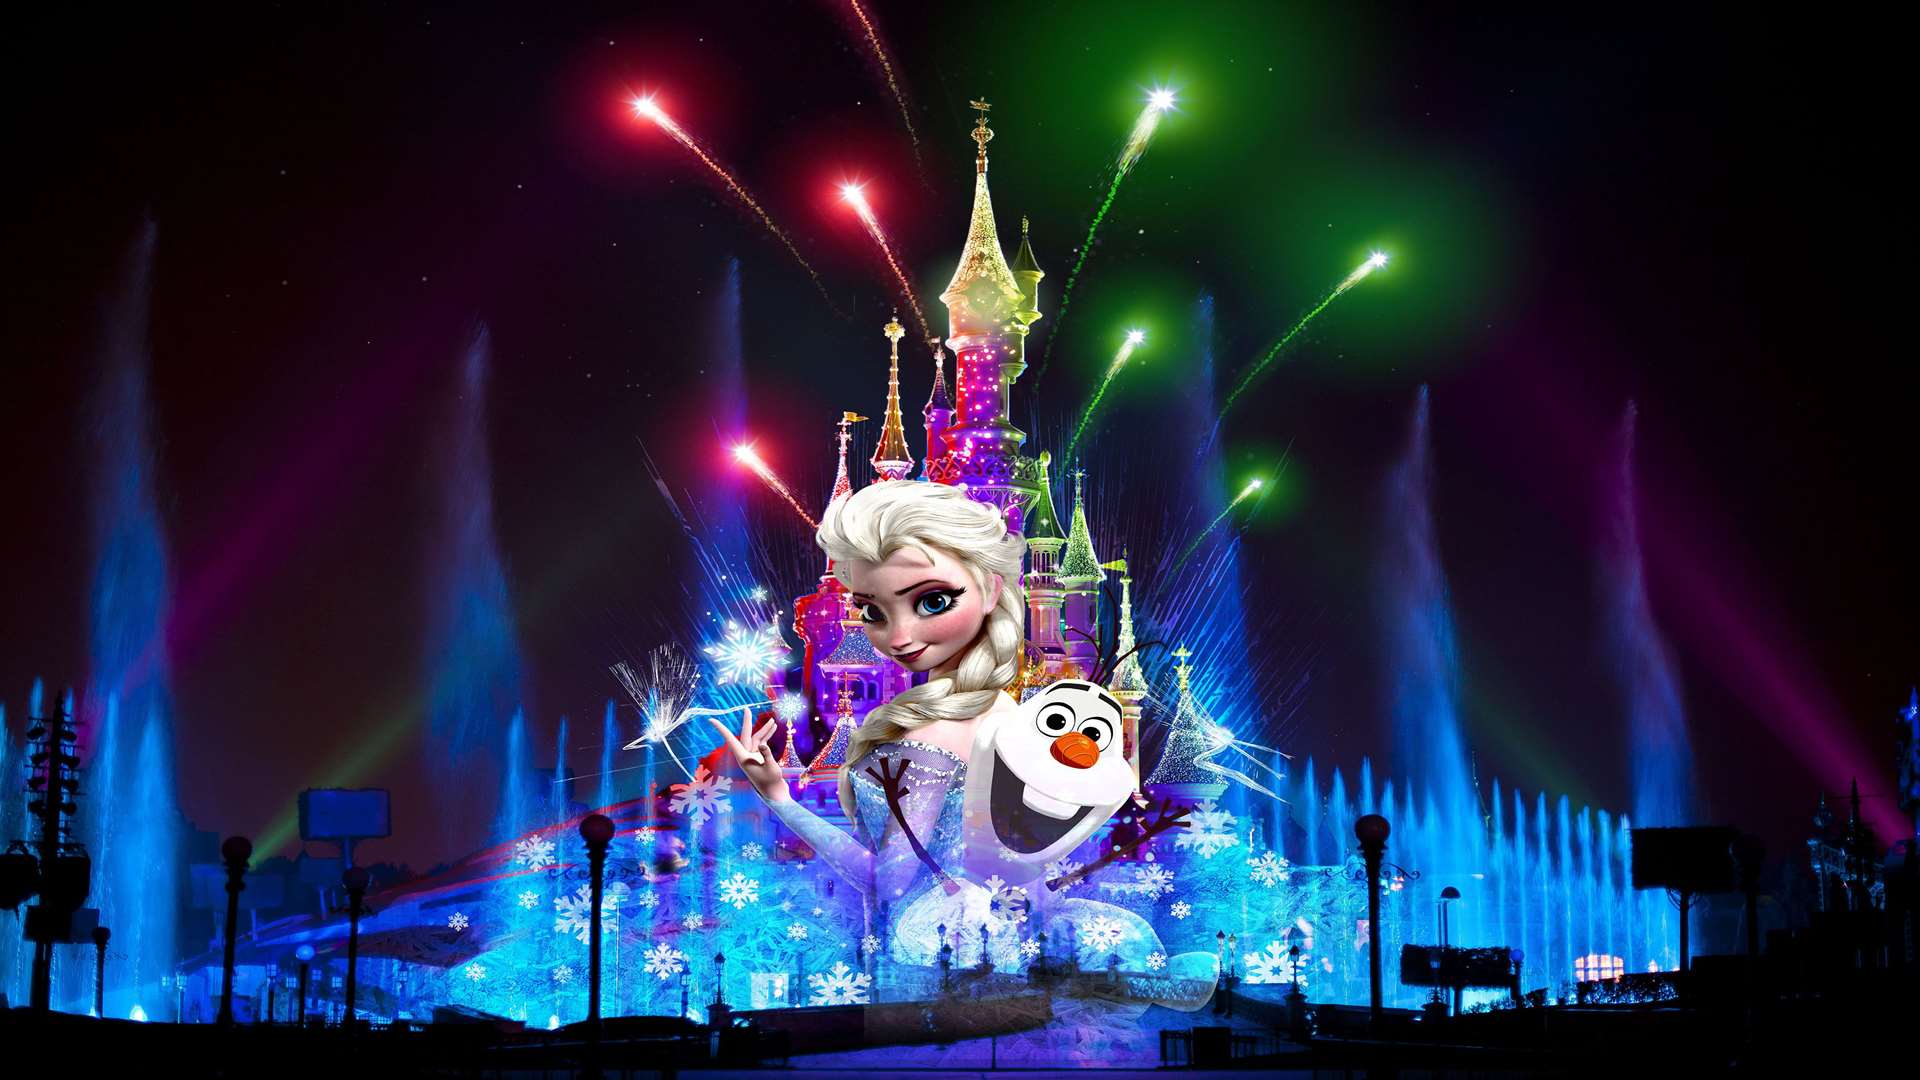 The spectacular Disney Dreams at Christmas lights show